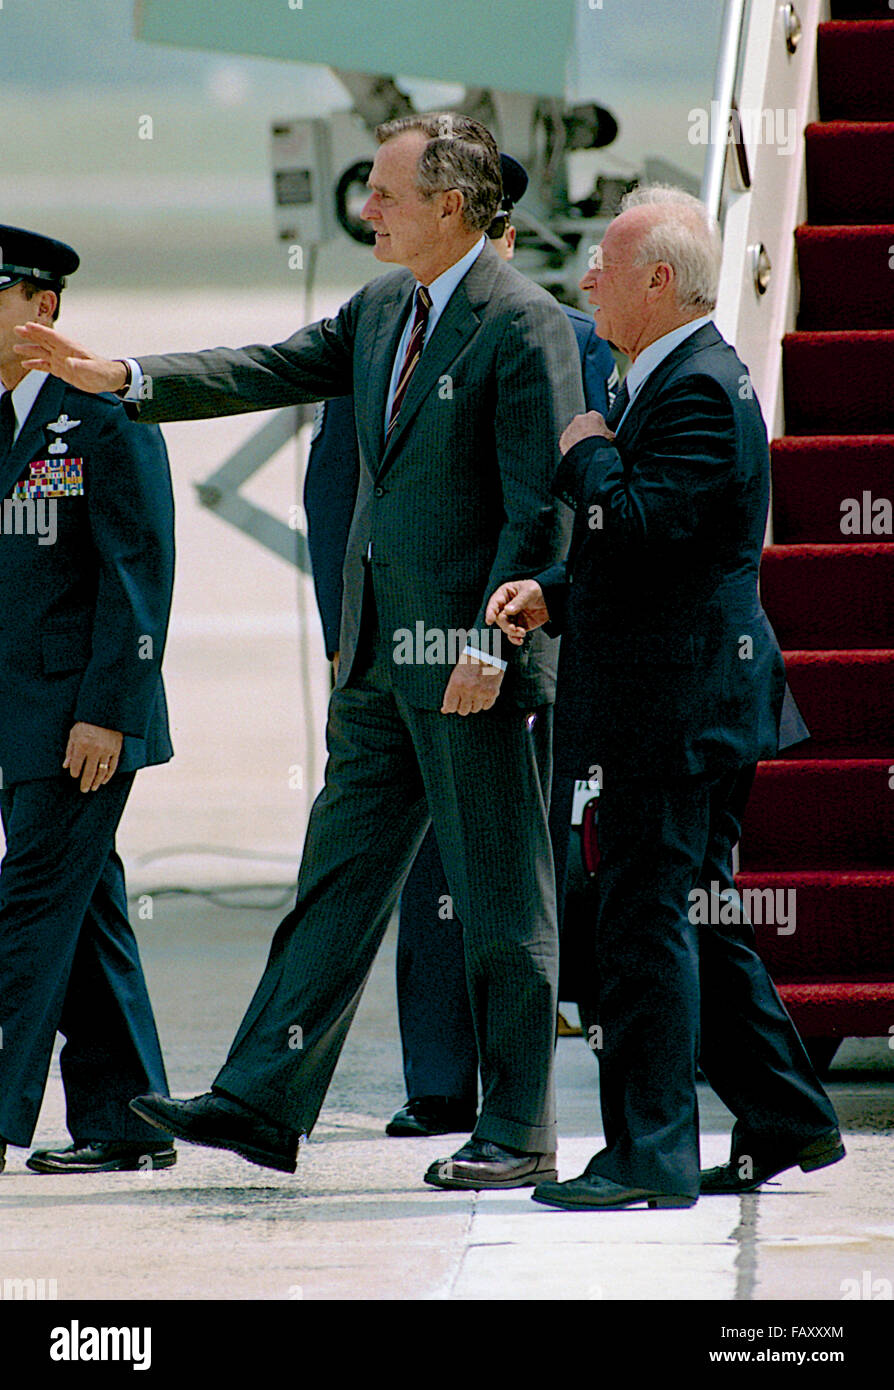 Camp Springs, Maryland. 8-11-1992 President George H.W. Bush arrives at Andrews Air Force on Air Force One. Traveling with the US President is Israeli Prime Minister Yitzhak Rabin  Credit: Mark Reinstein Stock Photo